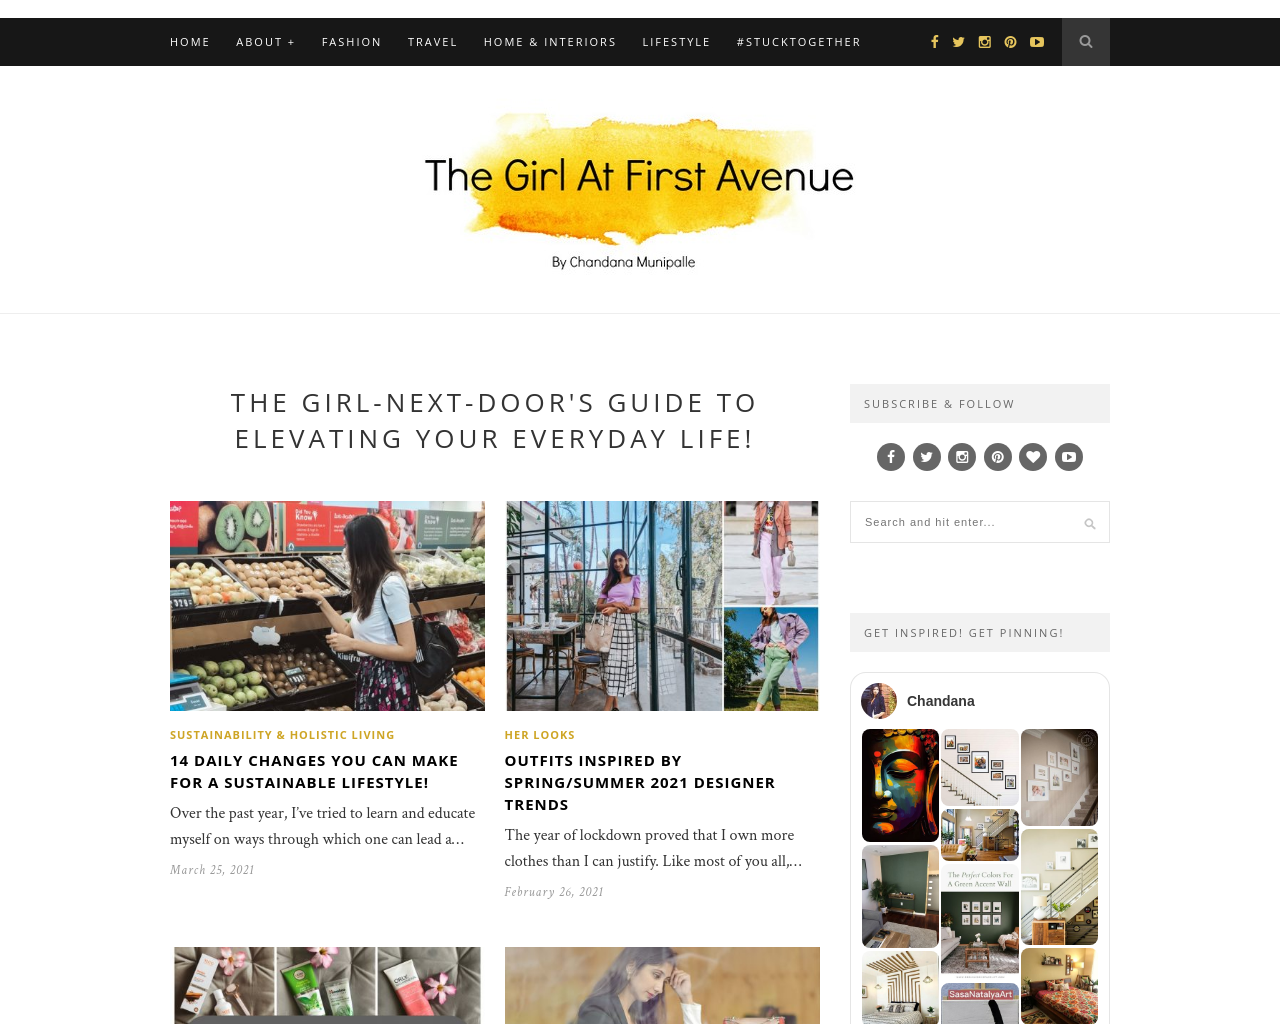 The Girl At First Avenue